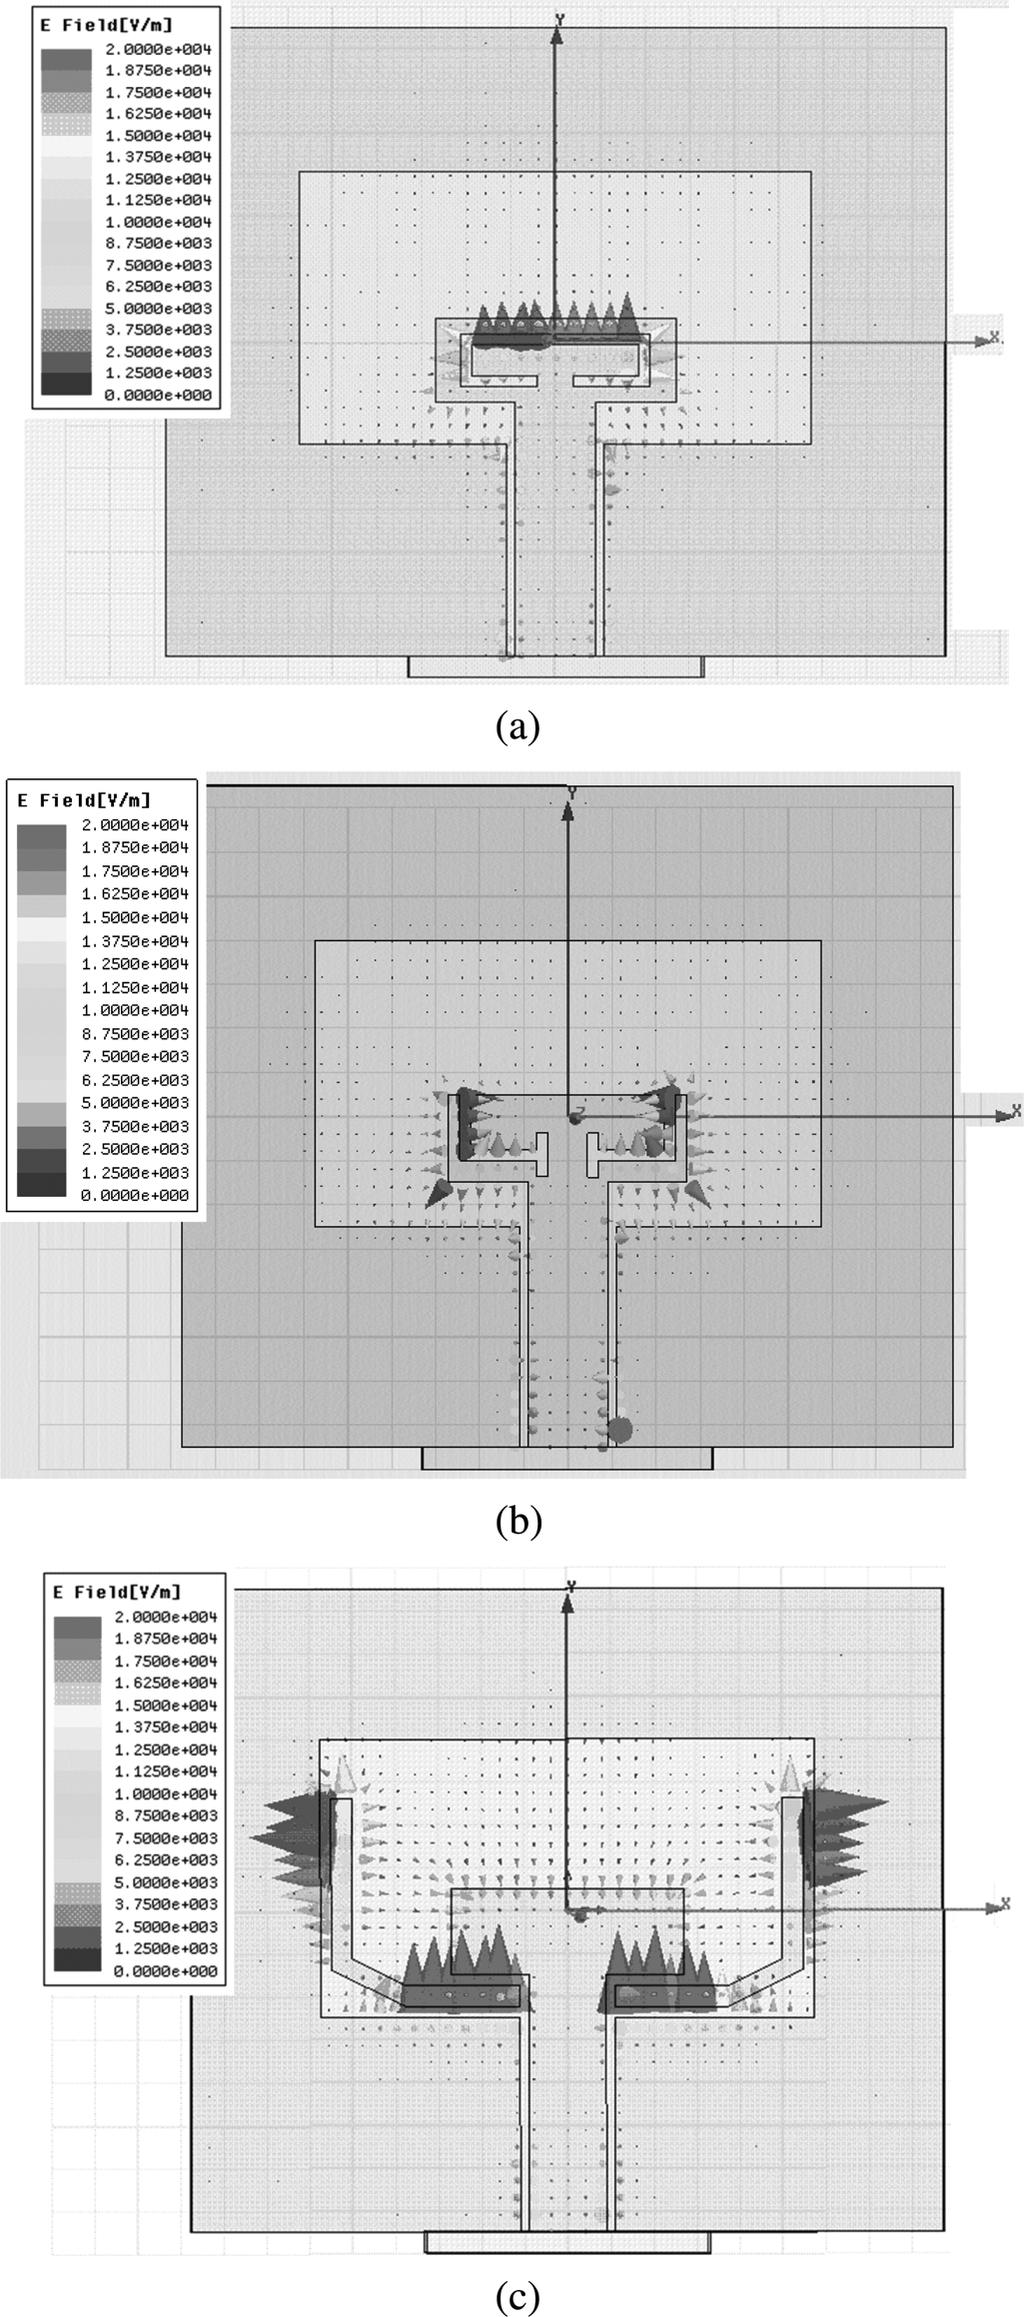 3080 IEEE TRANSACTIONS ON ANTENNAS AND PROPAGATION, VOL. 54, NO. 11, NOVEMBER 2006 Fig. 12. Measured return loss of the three band-notched designs, compared to the original design. Fig. 13.